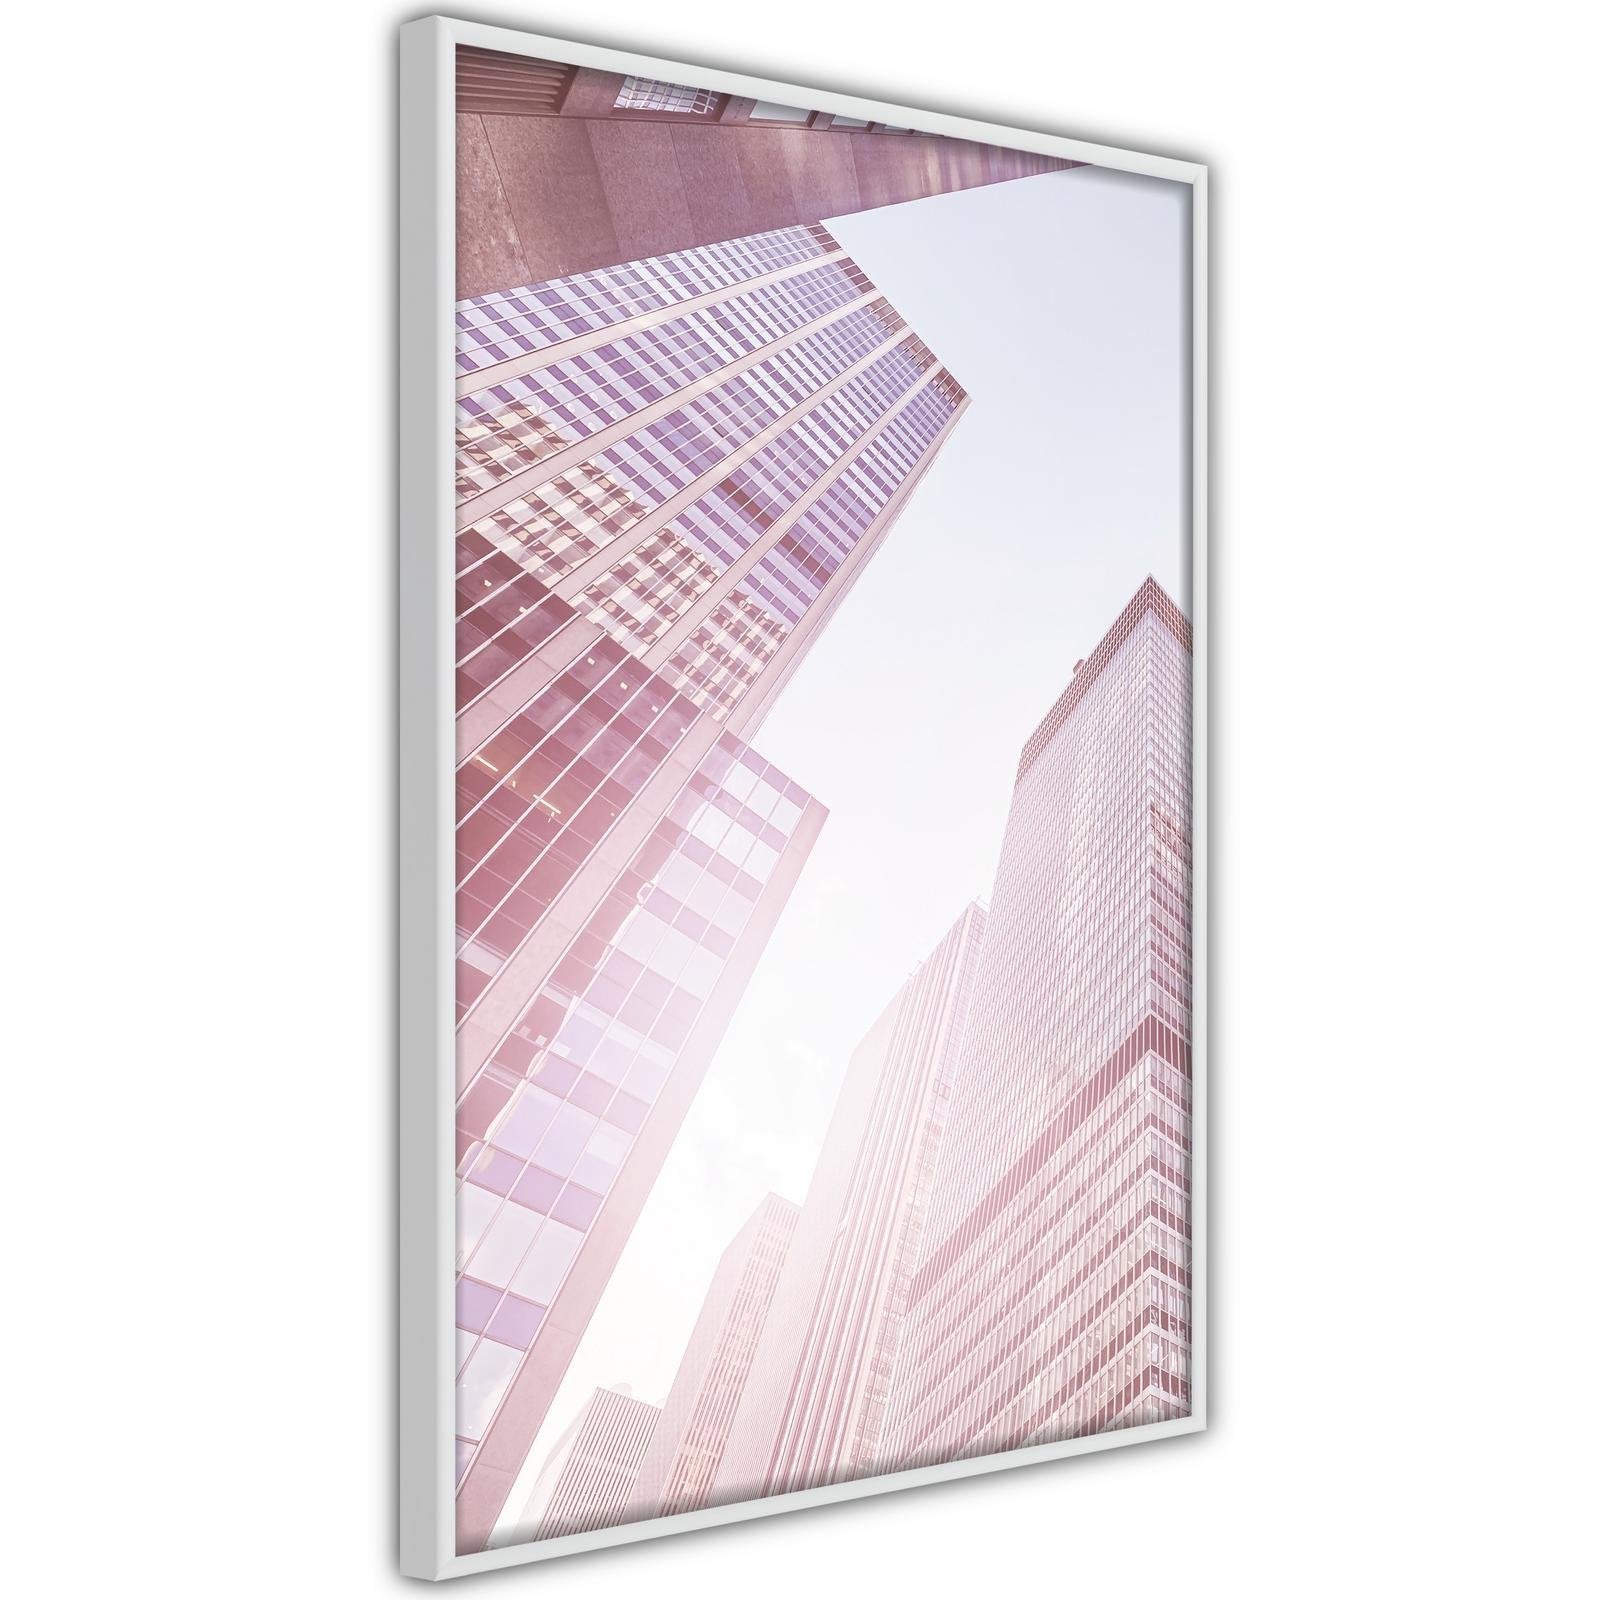 Inramad Poster / Tavla - Steel and Glass (Pink)-Poster Inramad-Artgeist-peaceofhome.se